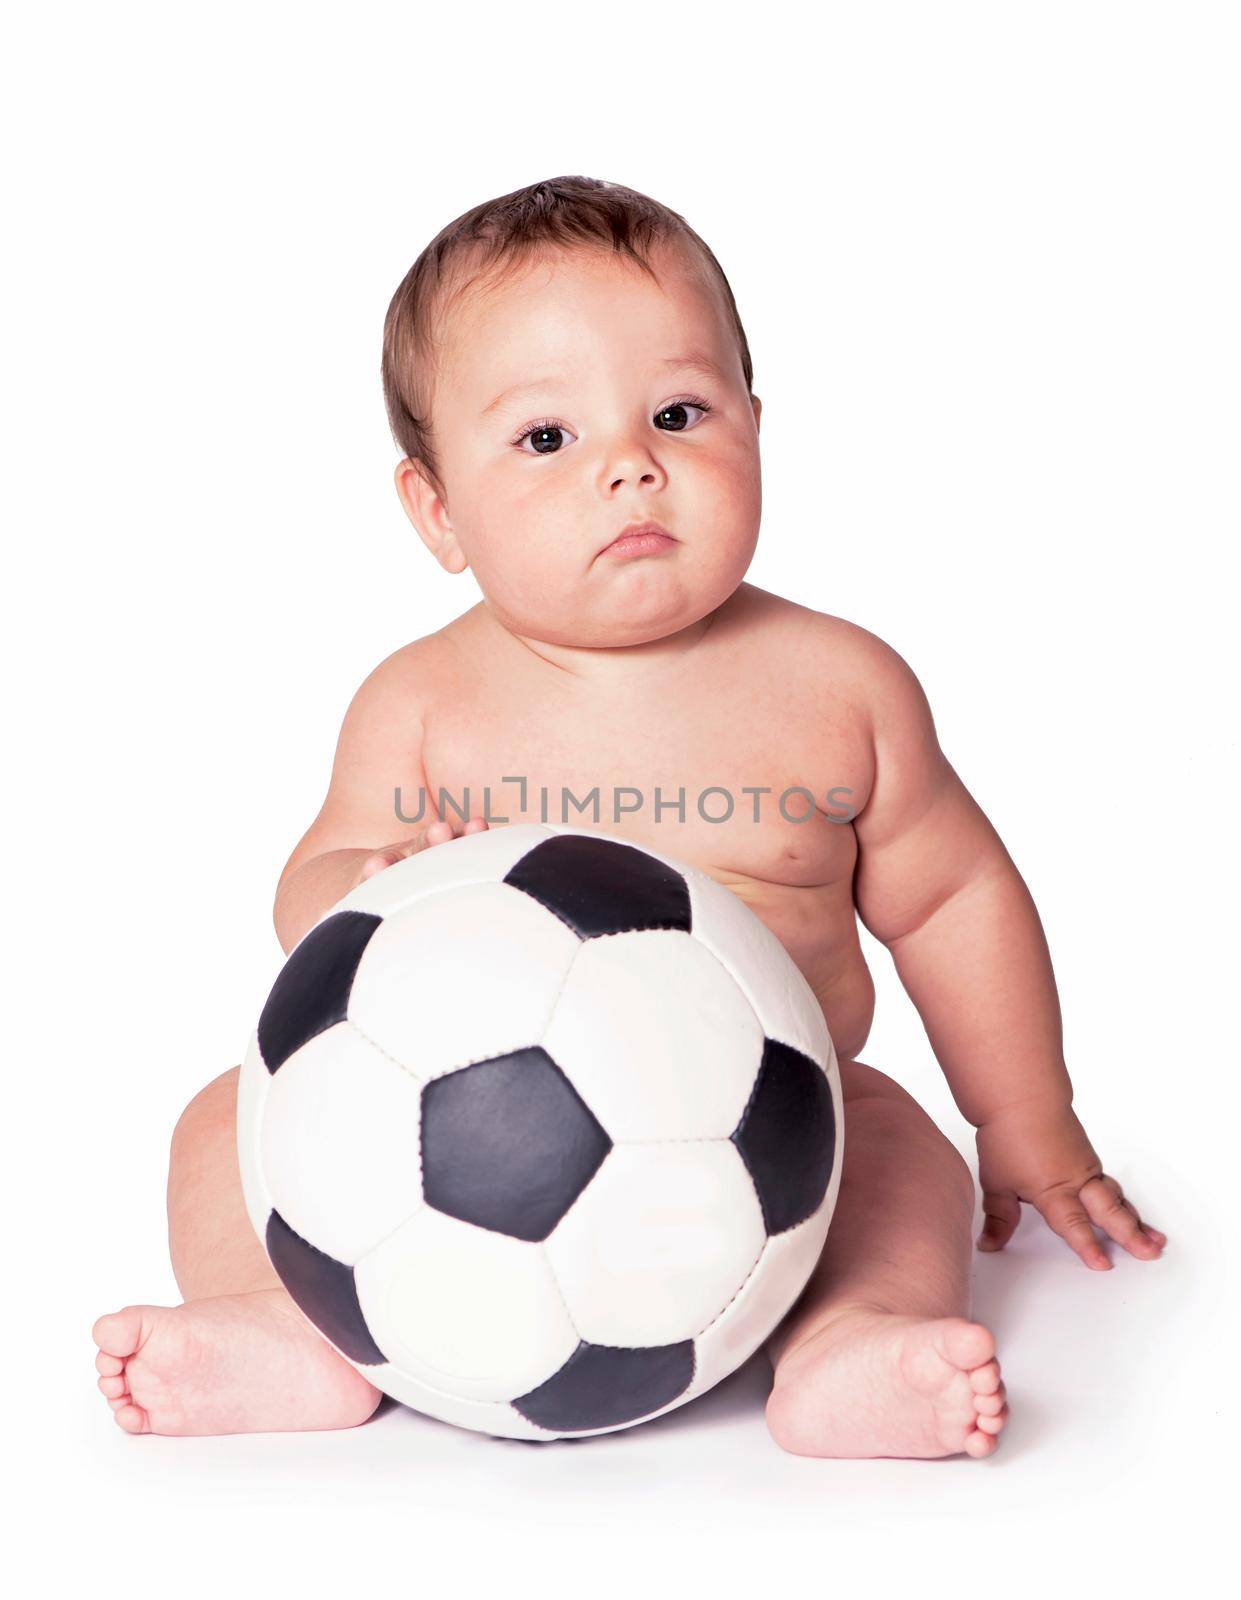 Child with soccer ball All on white background by aprilphoto